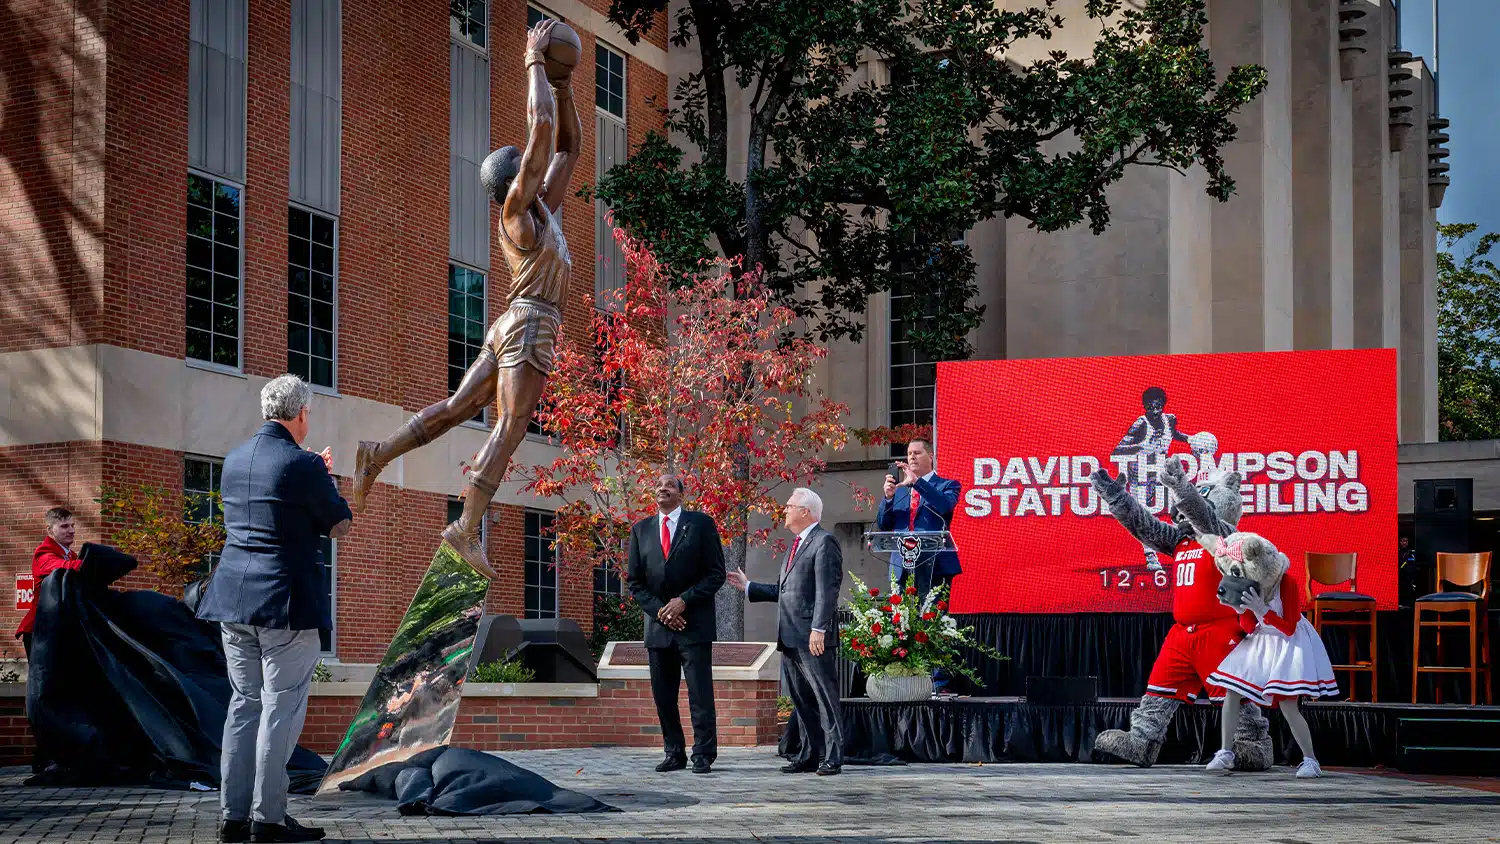 David Thompson and other attendees watch as a new statue in his likeness is unveiled next to Reynolds Coliseum.